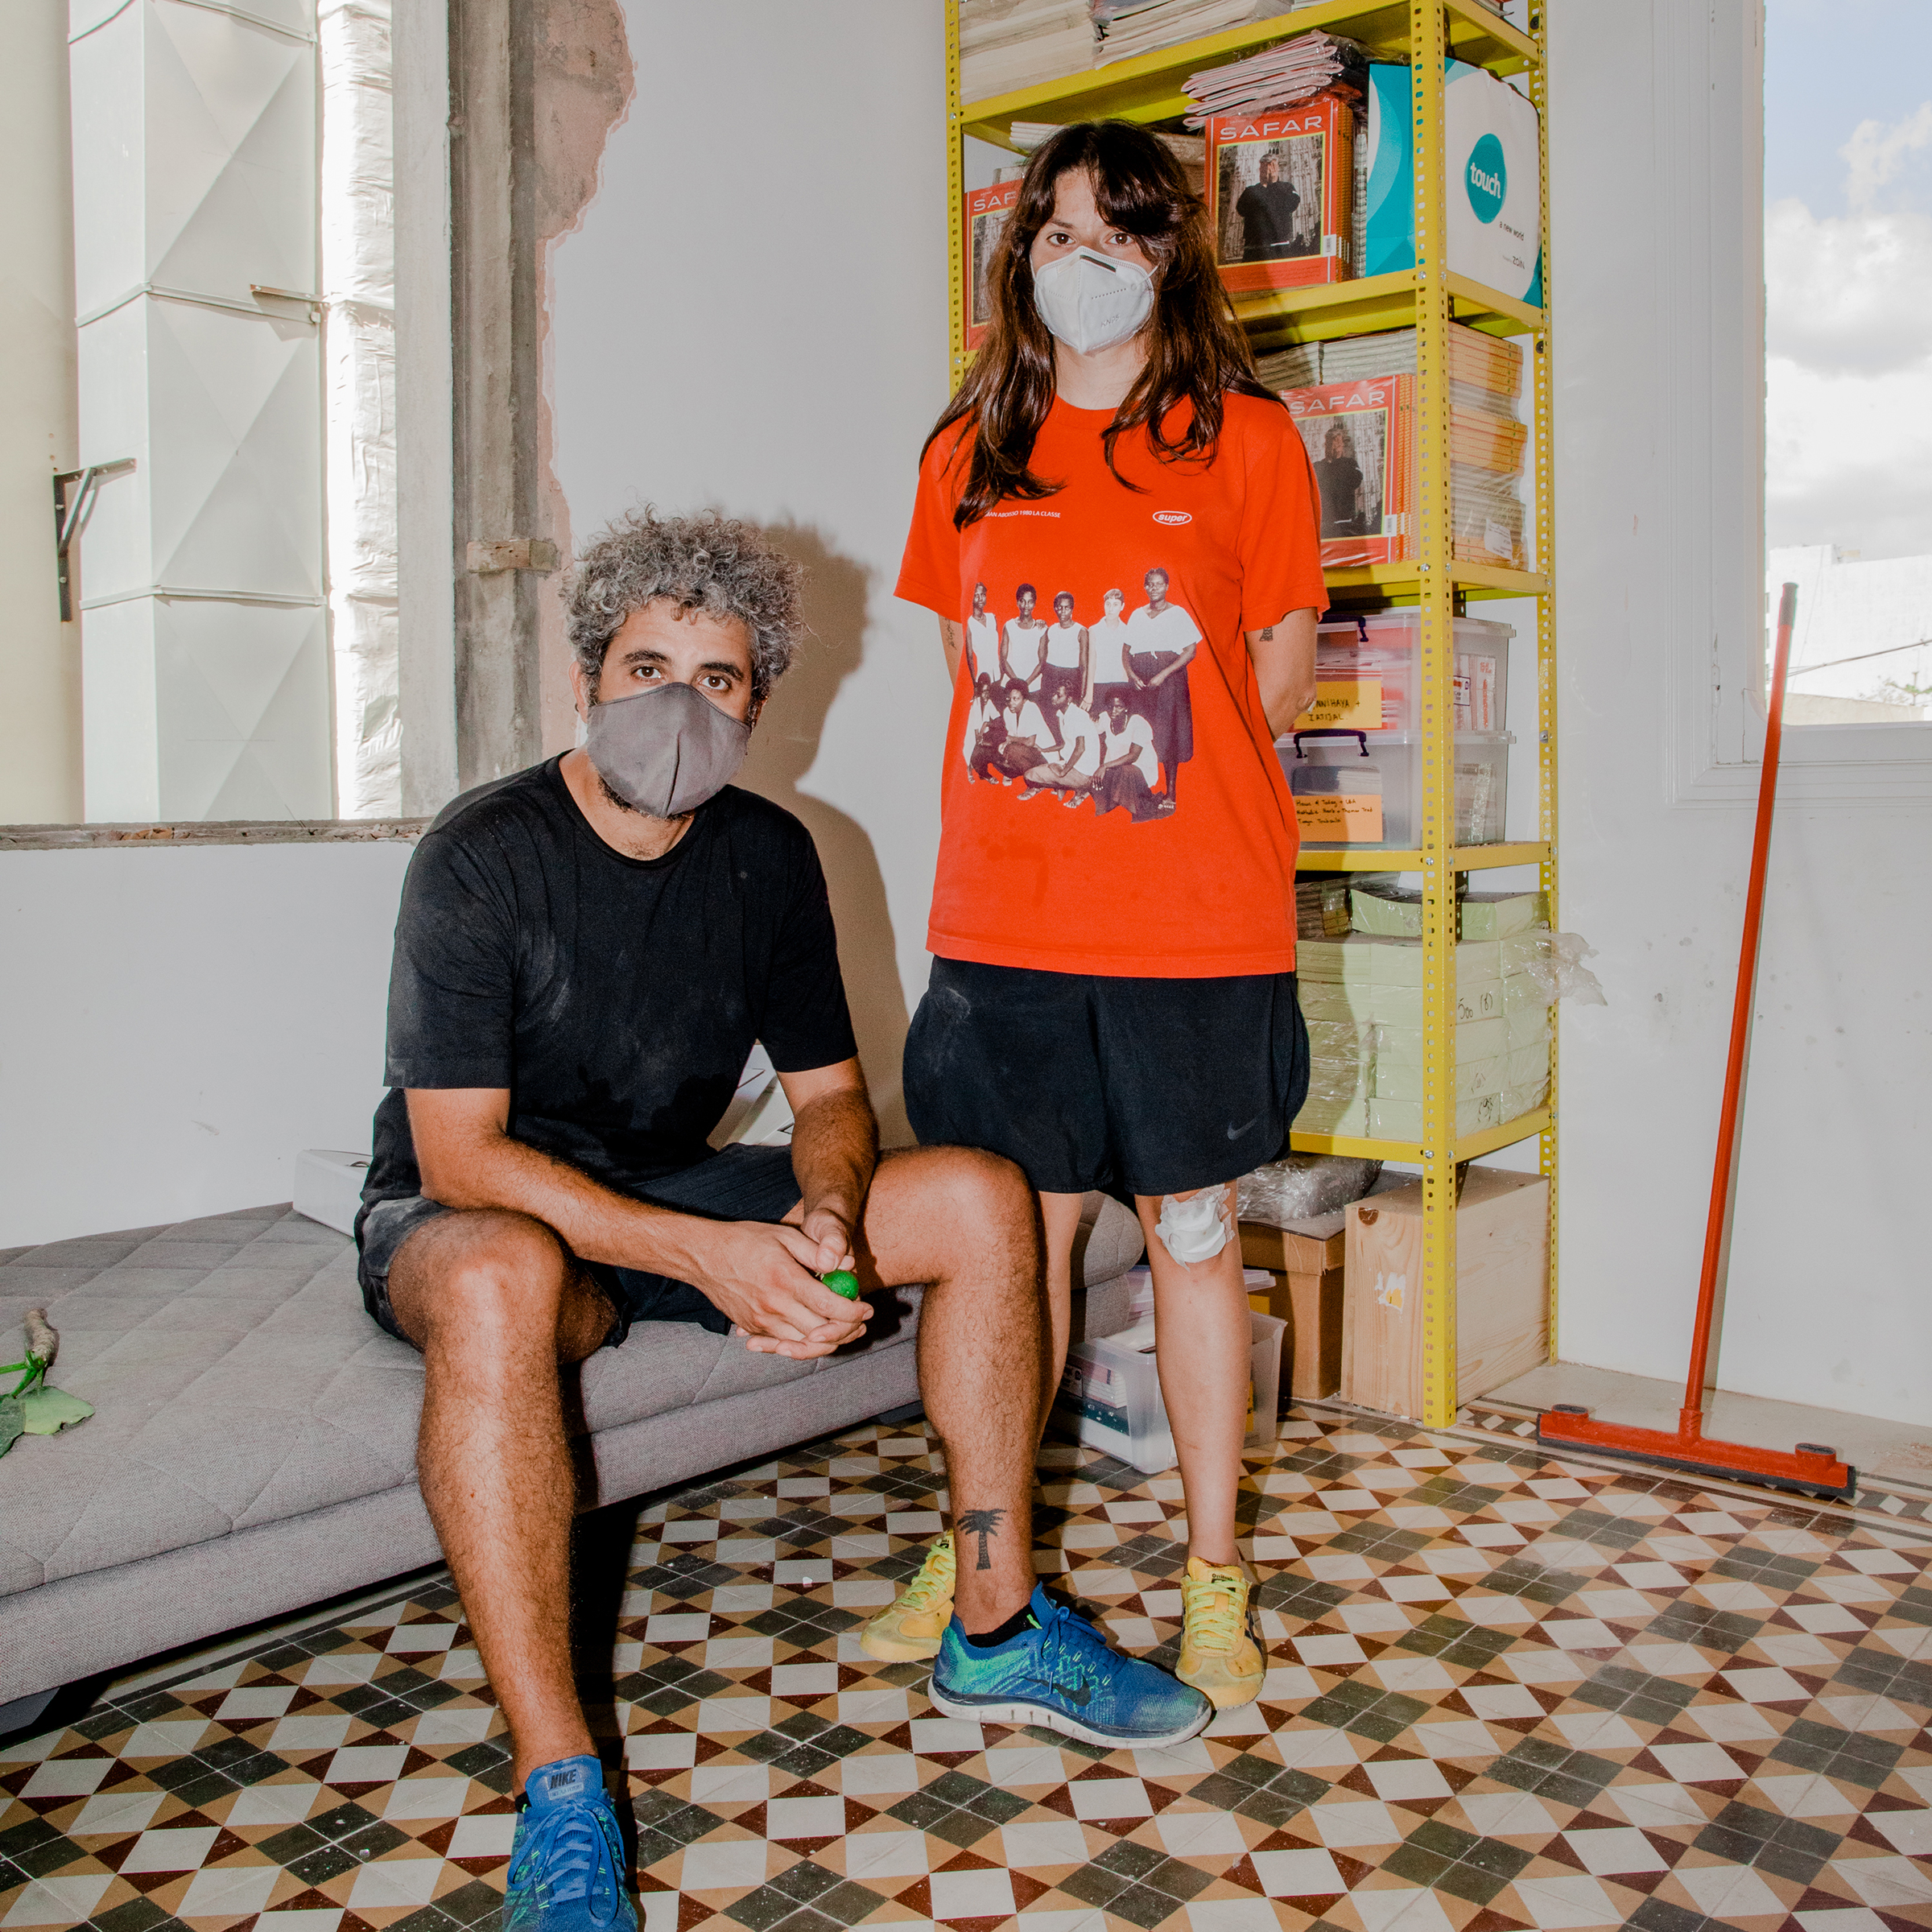 Hatem Imam and Maya Moumne of Studio Safar, a design and communications agency, photographed on Aug. 10. The explosion "effectively eradicated any semblance of normalcy, and with it any remnant of decency," the pair said in a statement. "The obscenity of the negligence of a state that knowingly stores 2,750 tons of highly explosive materials in its capital's port is only multiplied by this state's sickening lack of recourse in the aftermath."